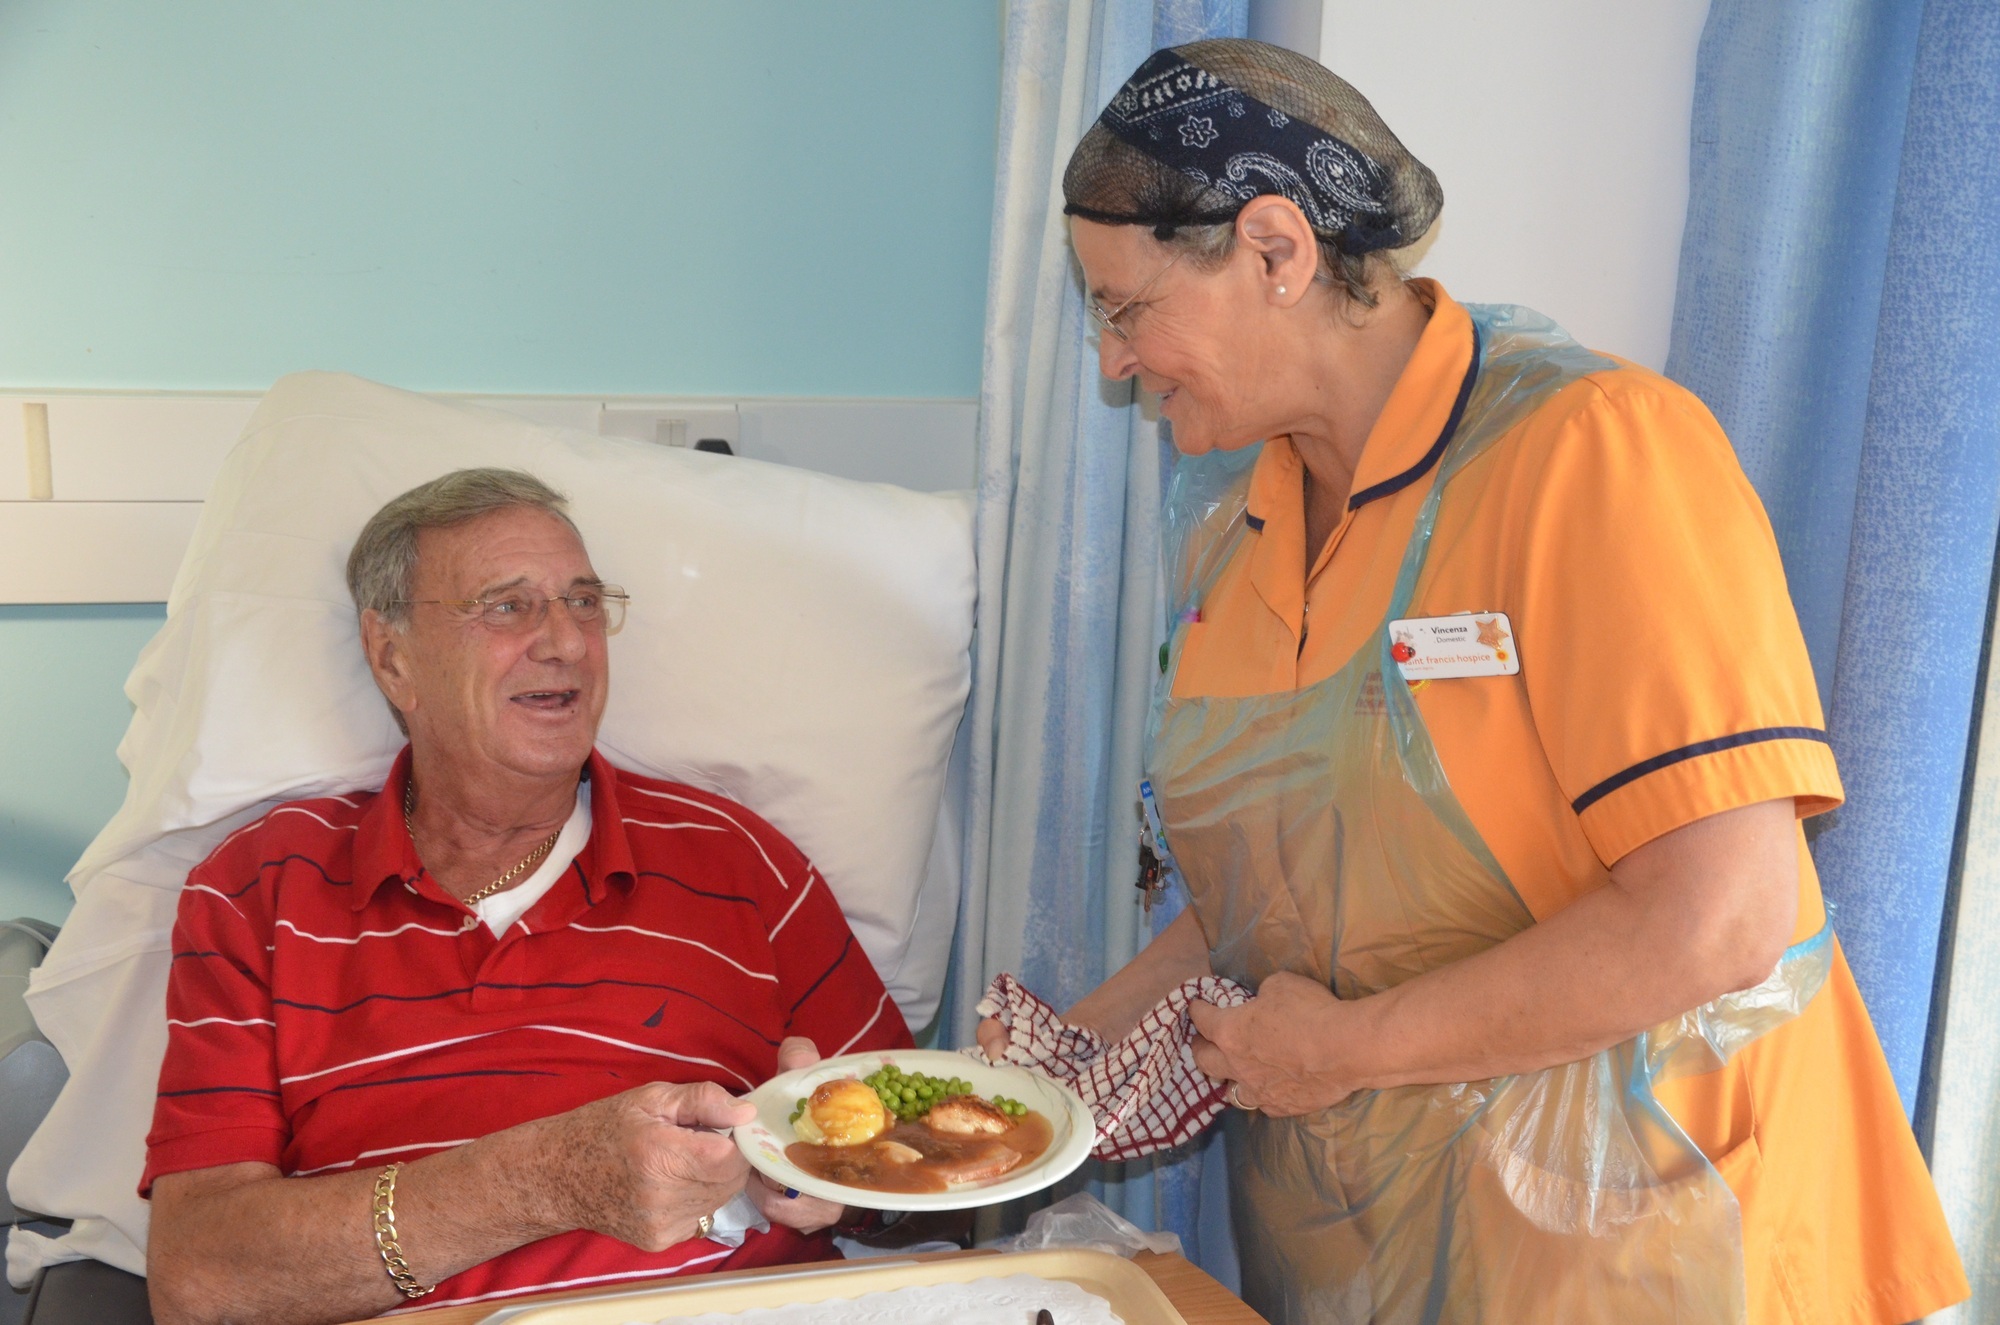 Patient being served a meal pre-lockdown